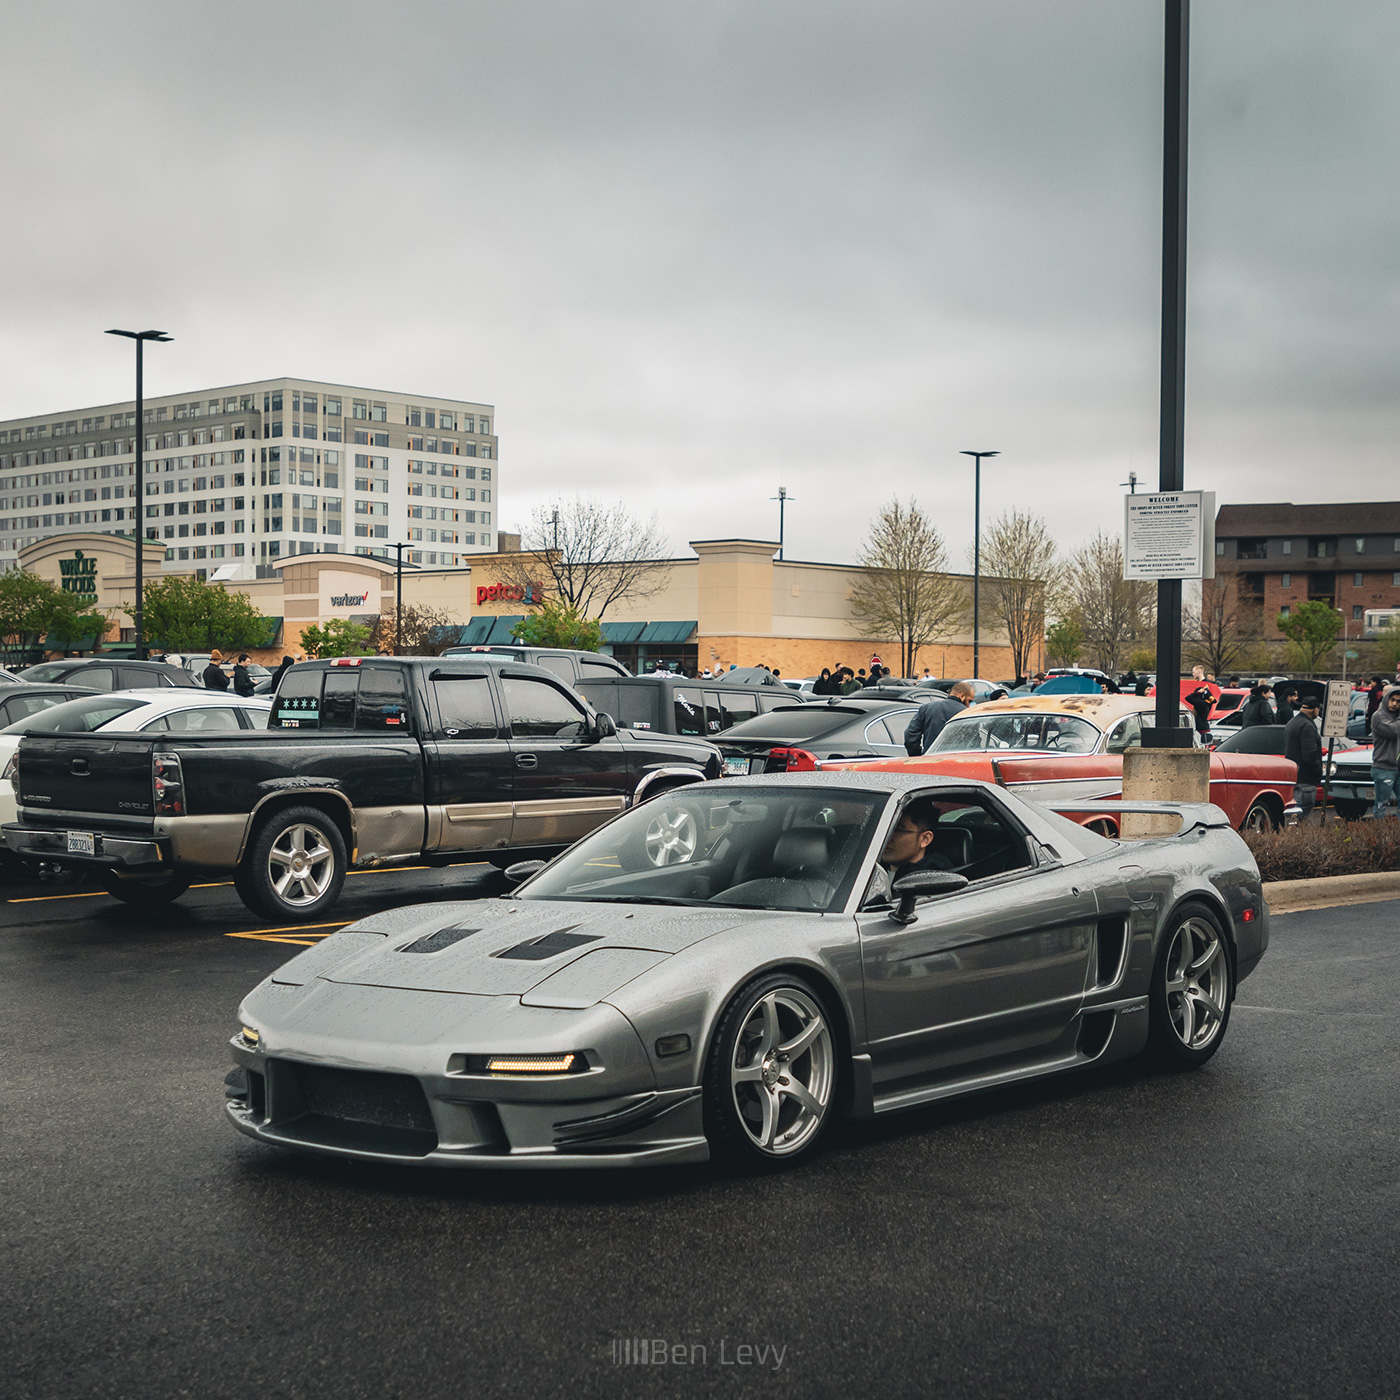 Custom Acura NSX at Car Meet in River Forest